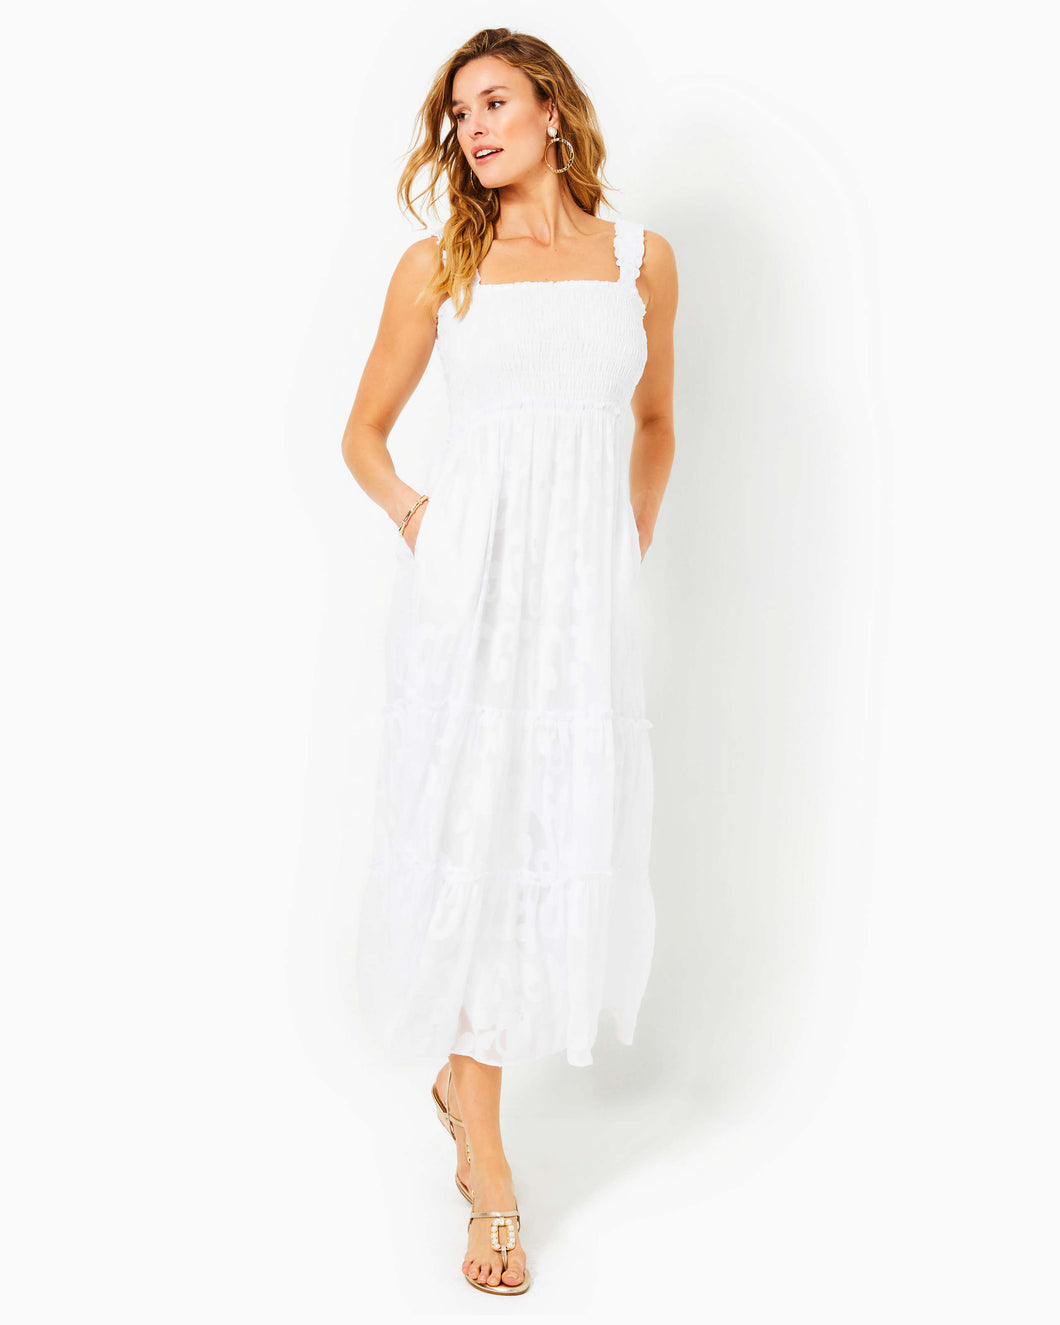 Hadly Smocked Maxi Dress - Resort White Poly Crepe Swirl Clip